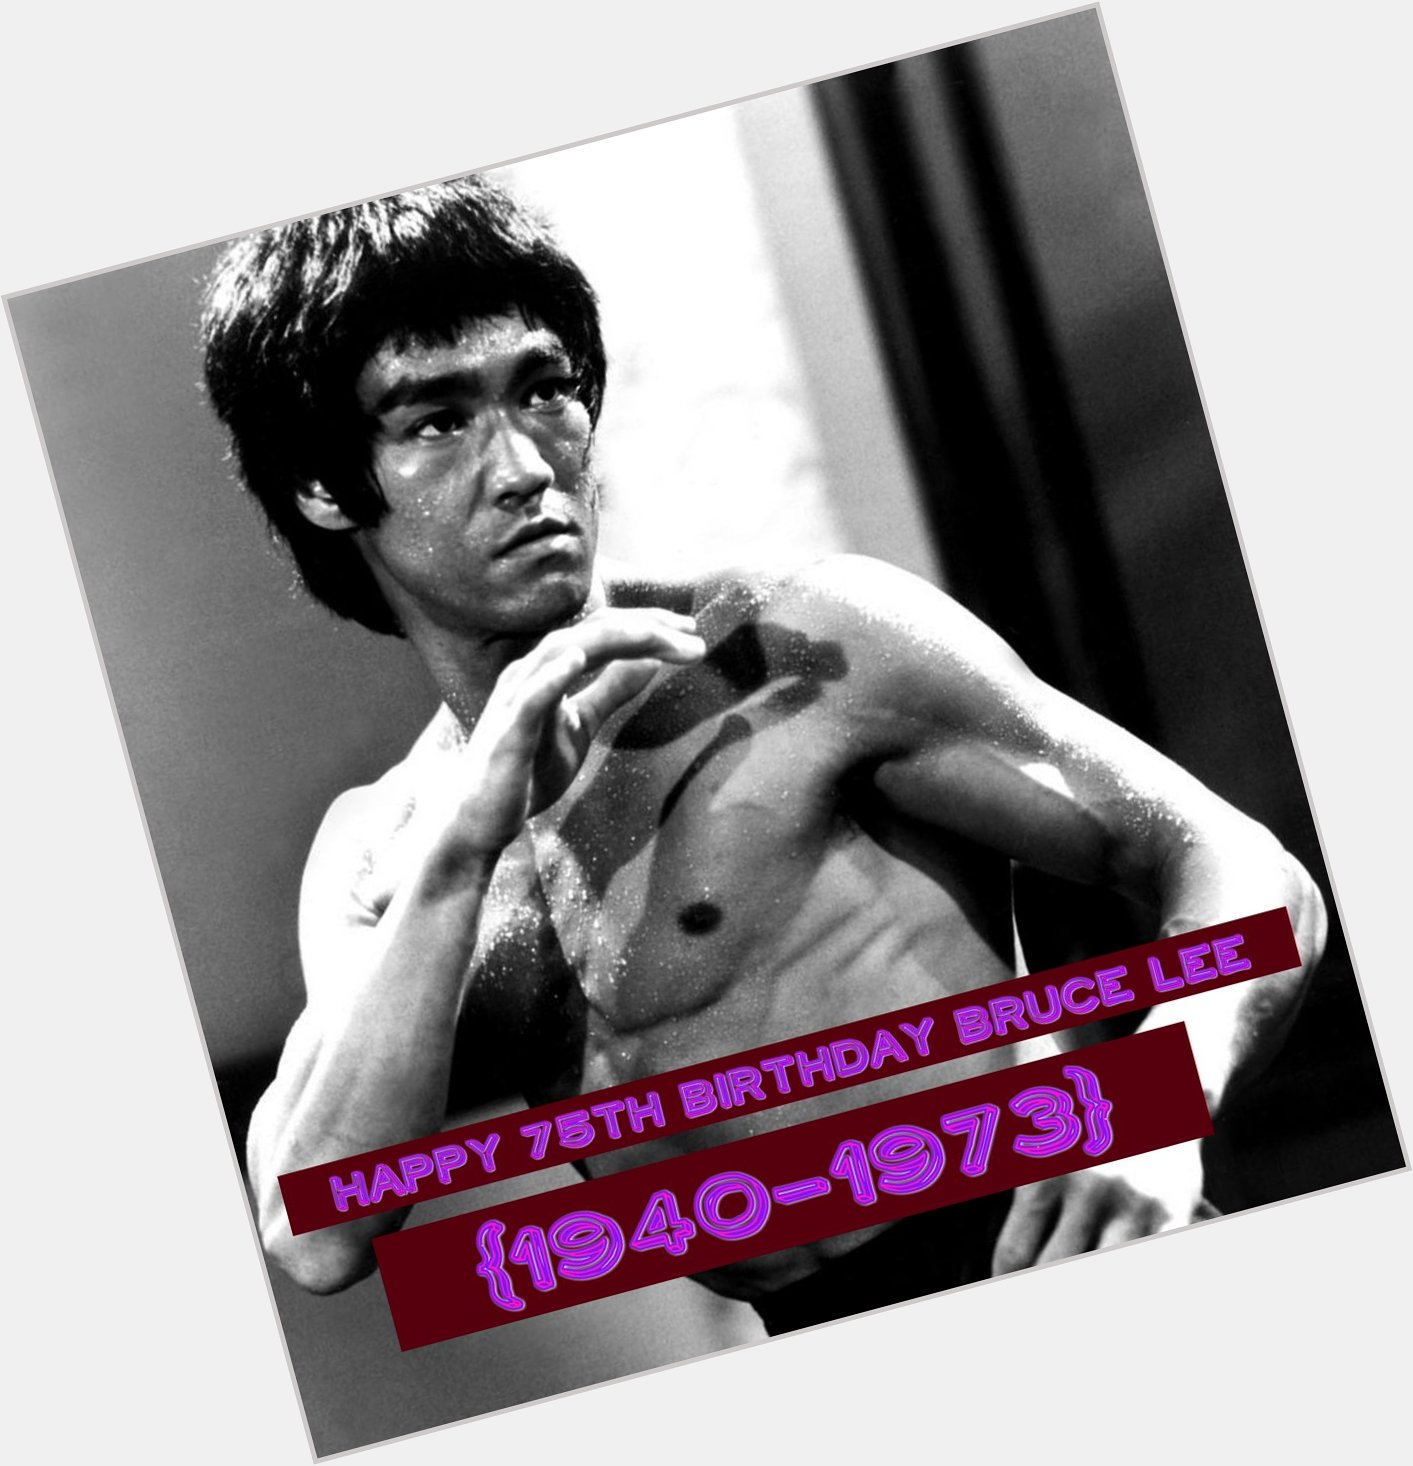 Happy 75th Birthday, Bruce Lee, Star of Enter the Dragon! May he RIP! 